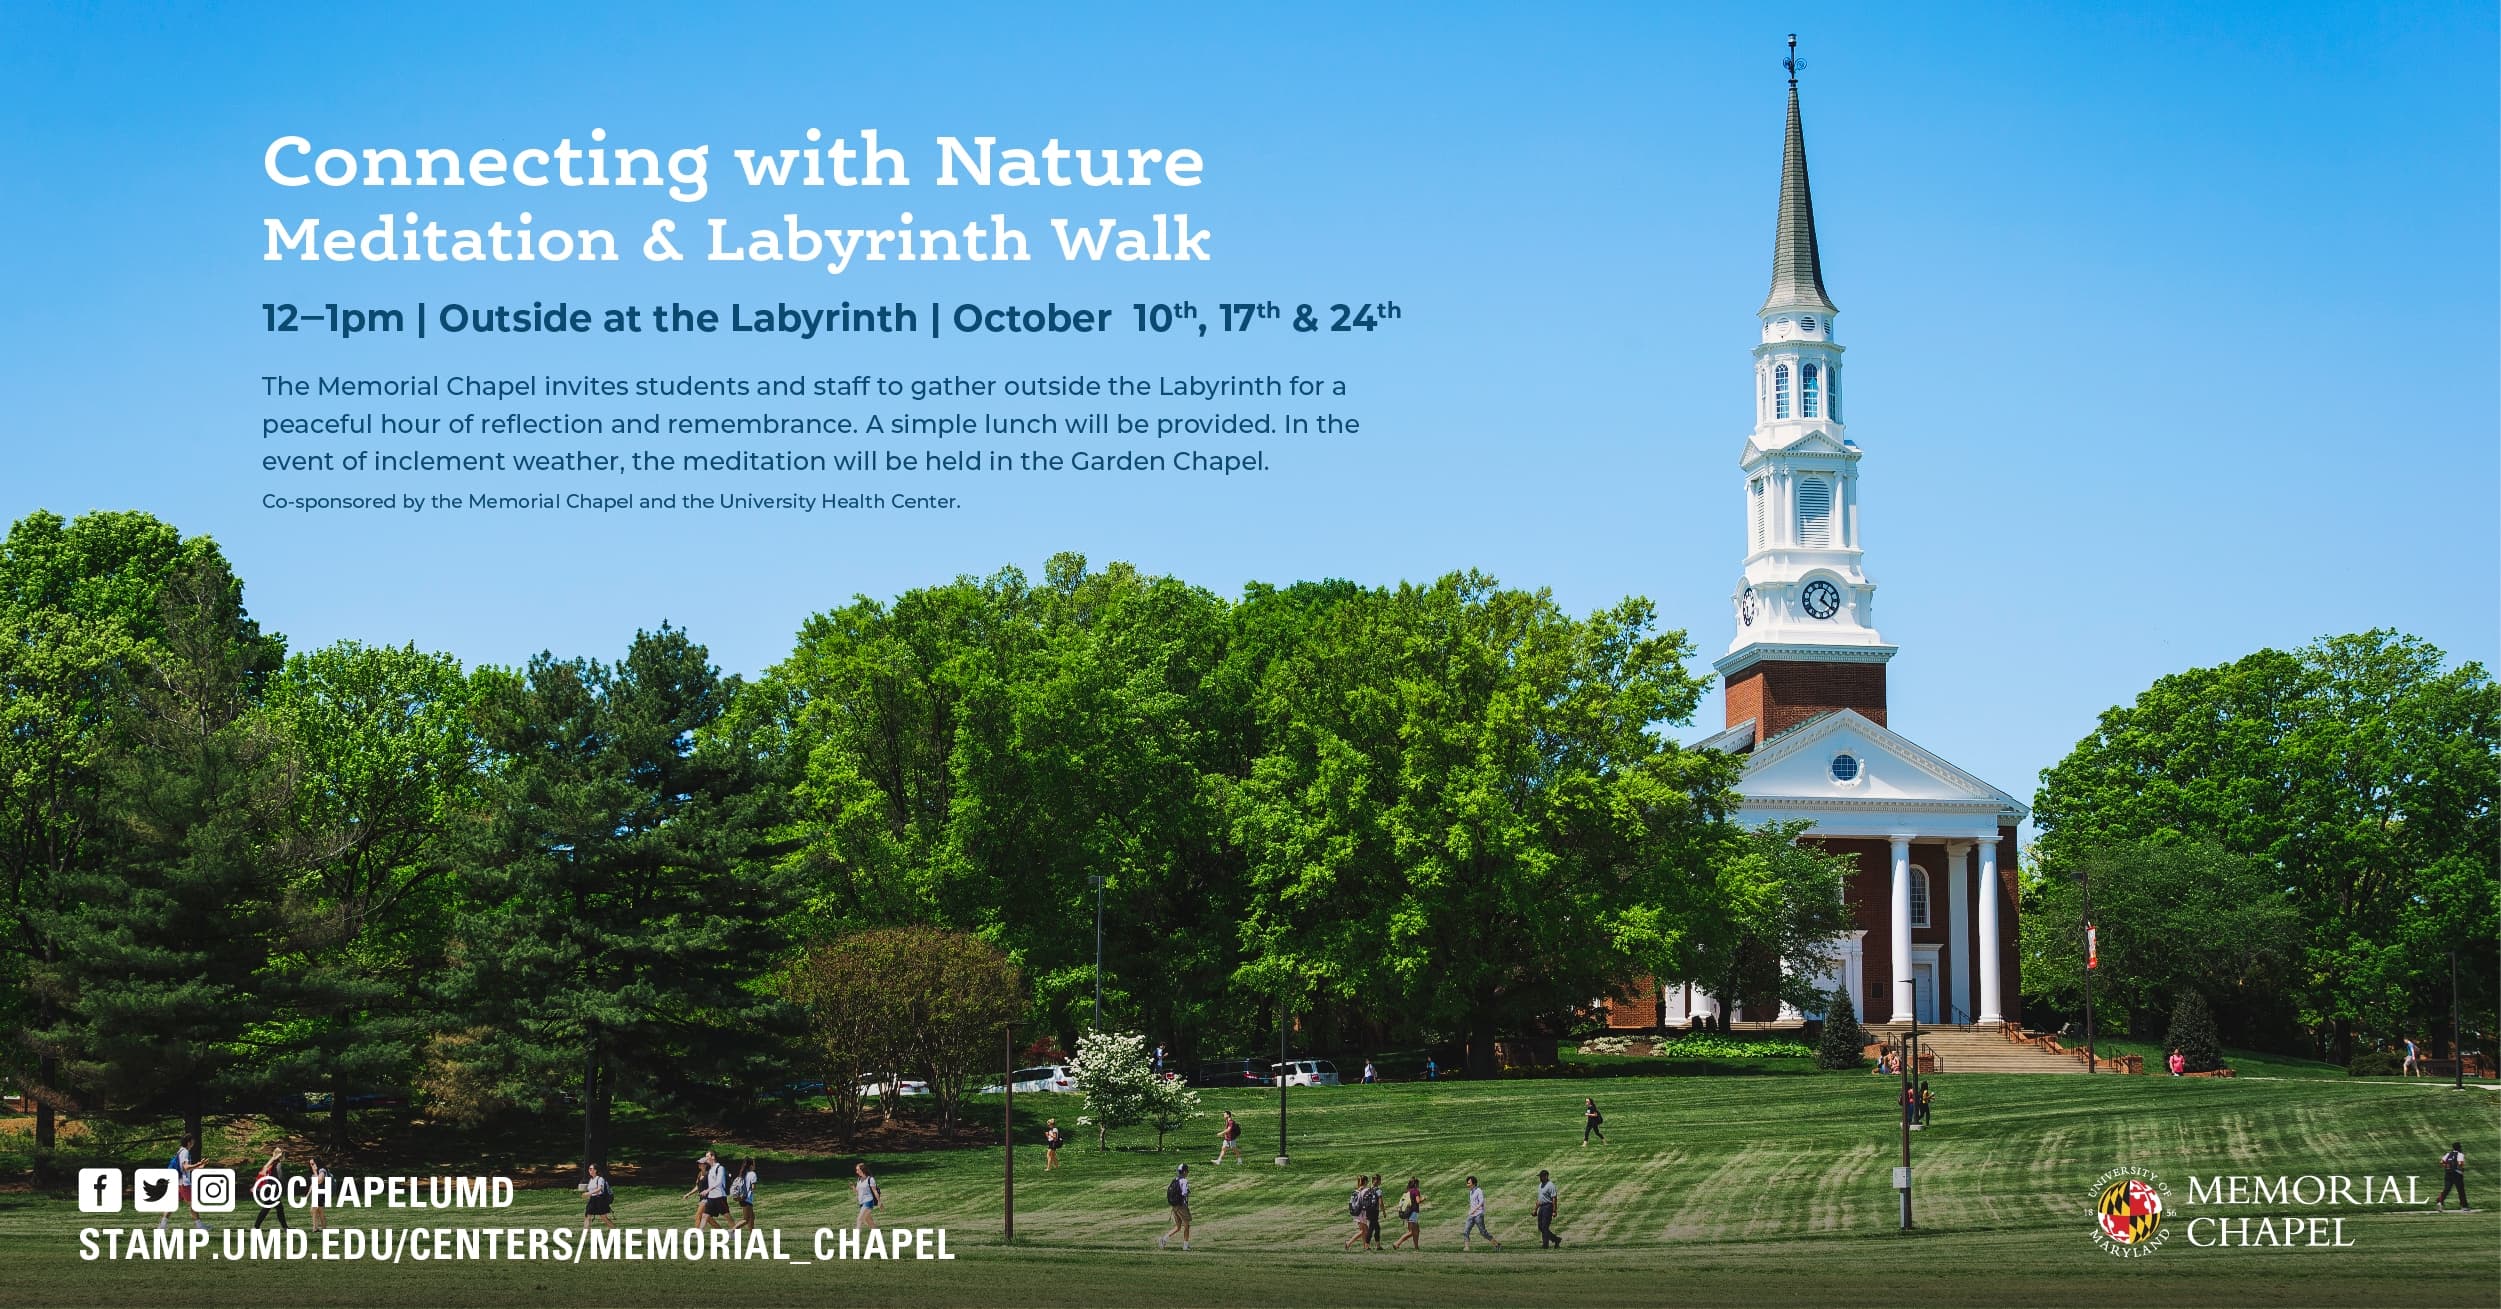 Photograph of the Memorial Chapel and lush green trees with event details as text.